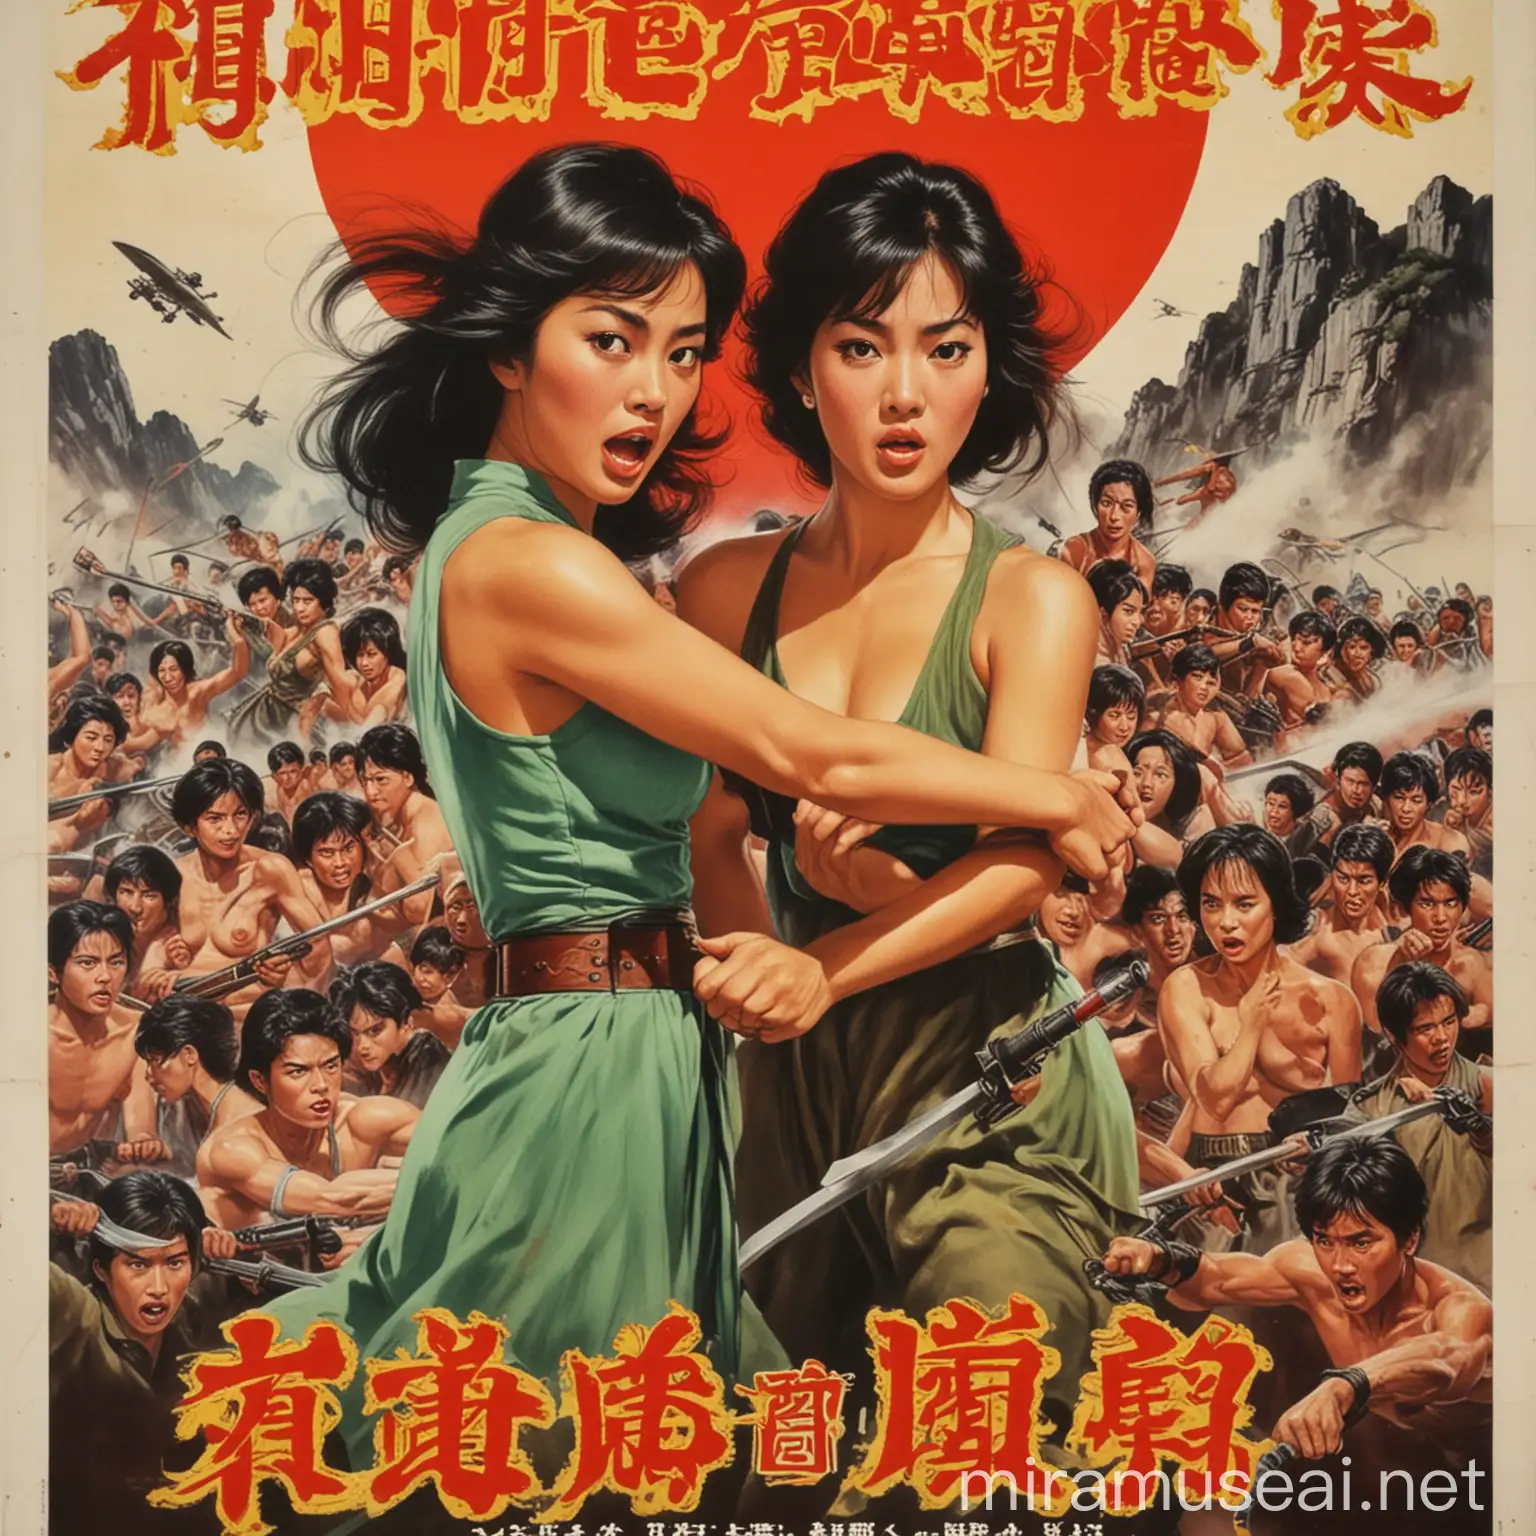 Vintage Hong Kong Movie Poster Featuring Fighting Women